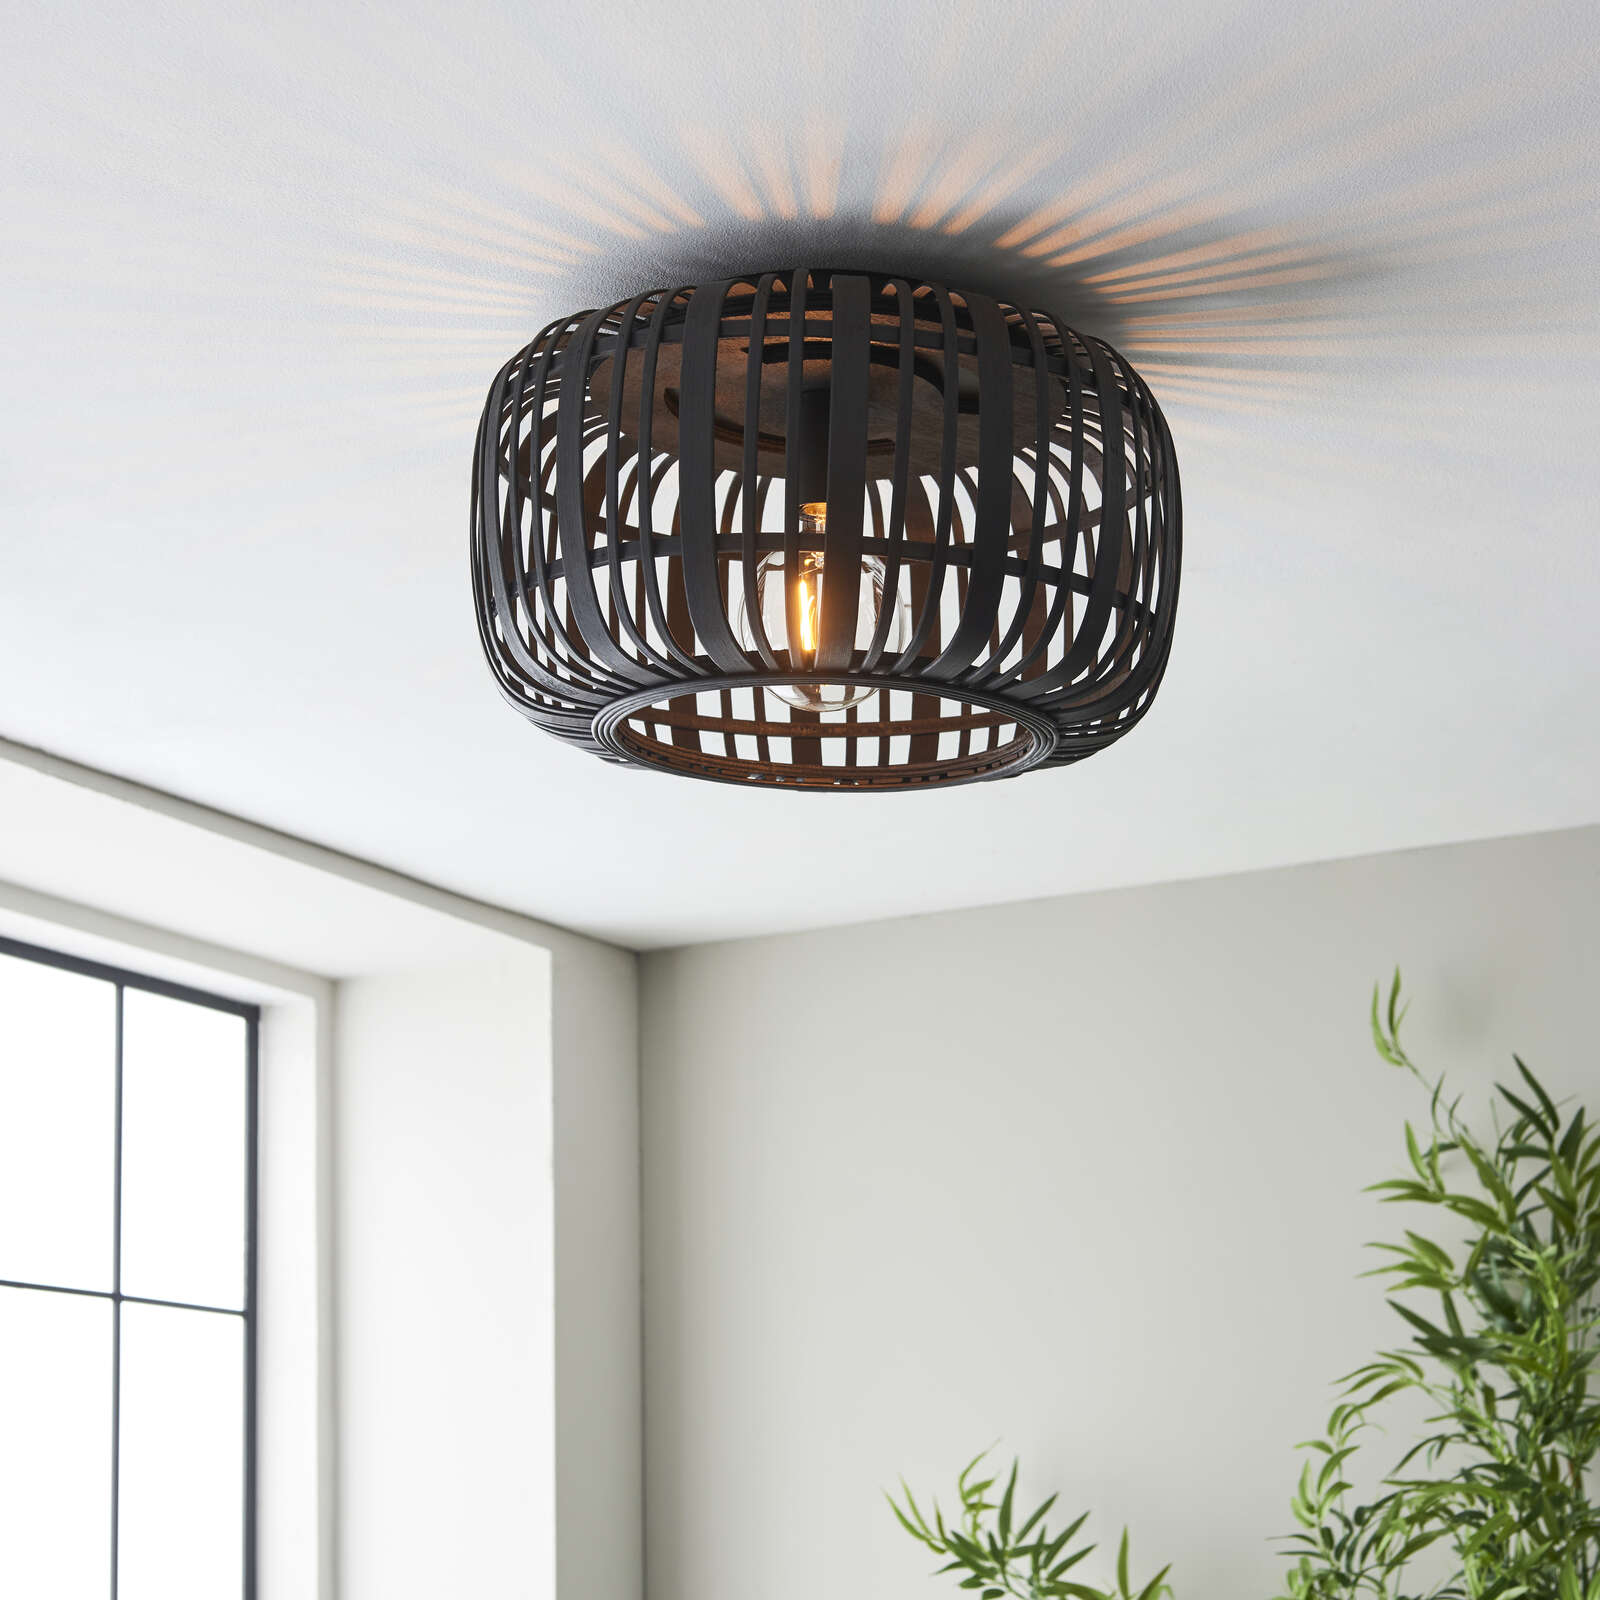             Bamboo ceiling light - Willi 7 - Brown
        